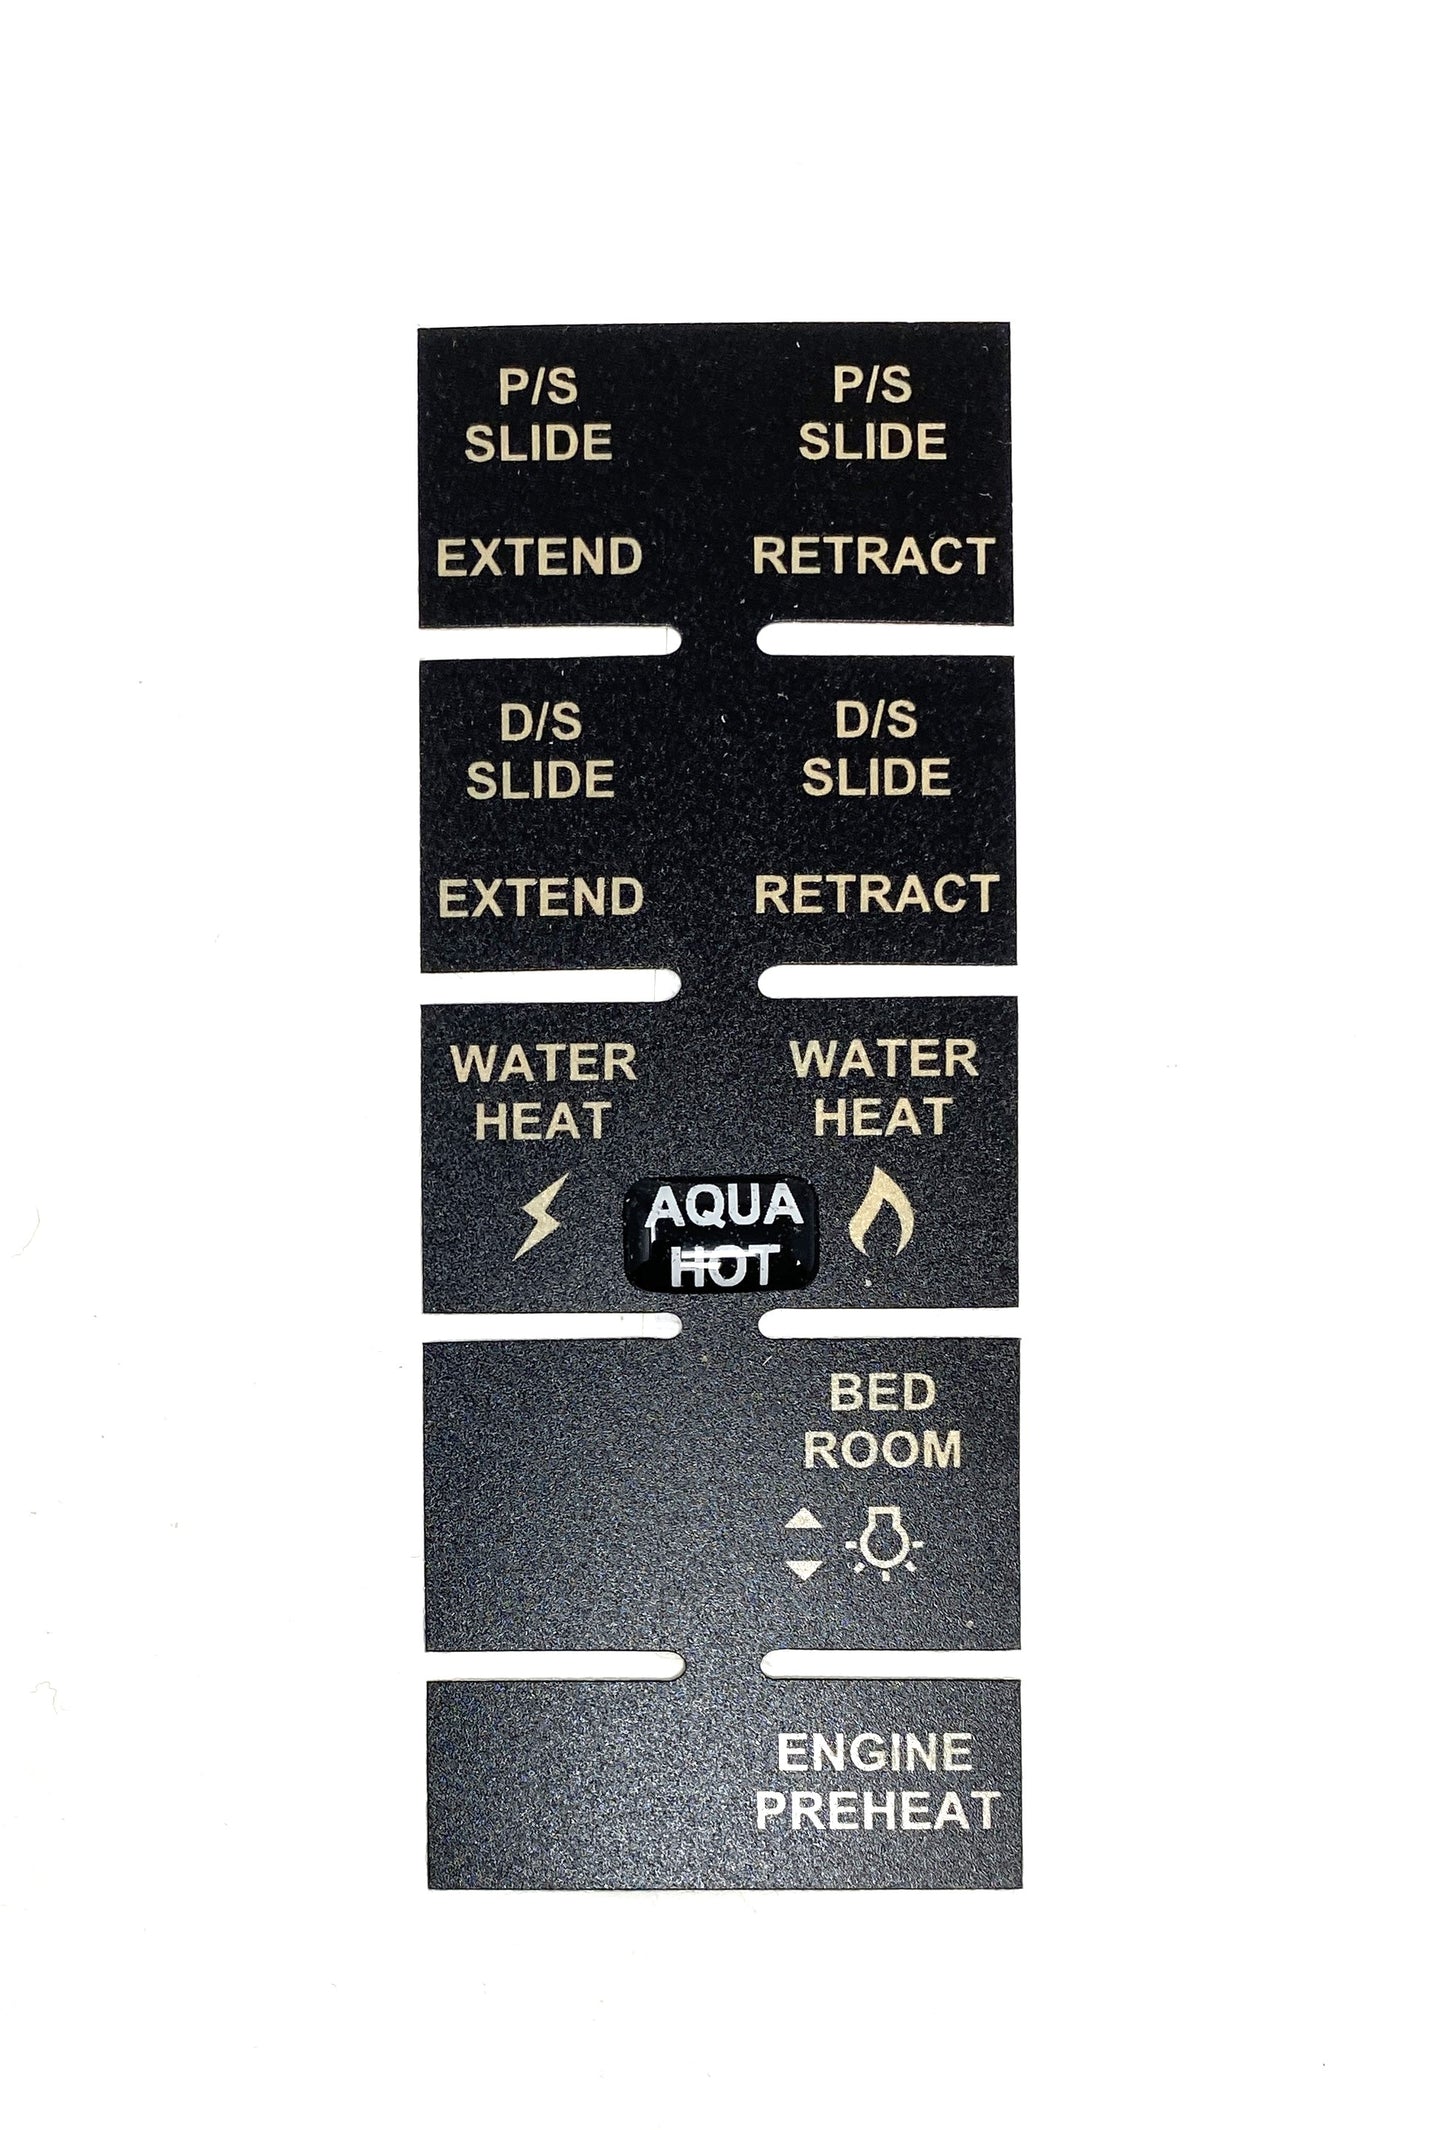 5040561 ASSP3BDBQ - Sw Panel Part, 2015 BUS, GALLEY DISPLAY W/OUT HALL LIGHTS, Label